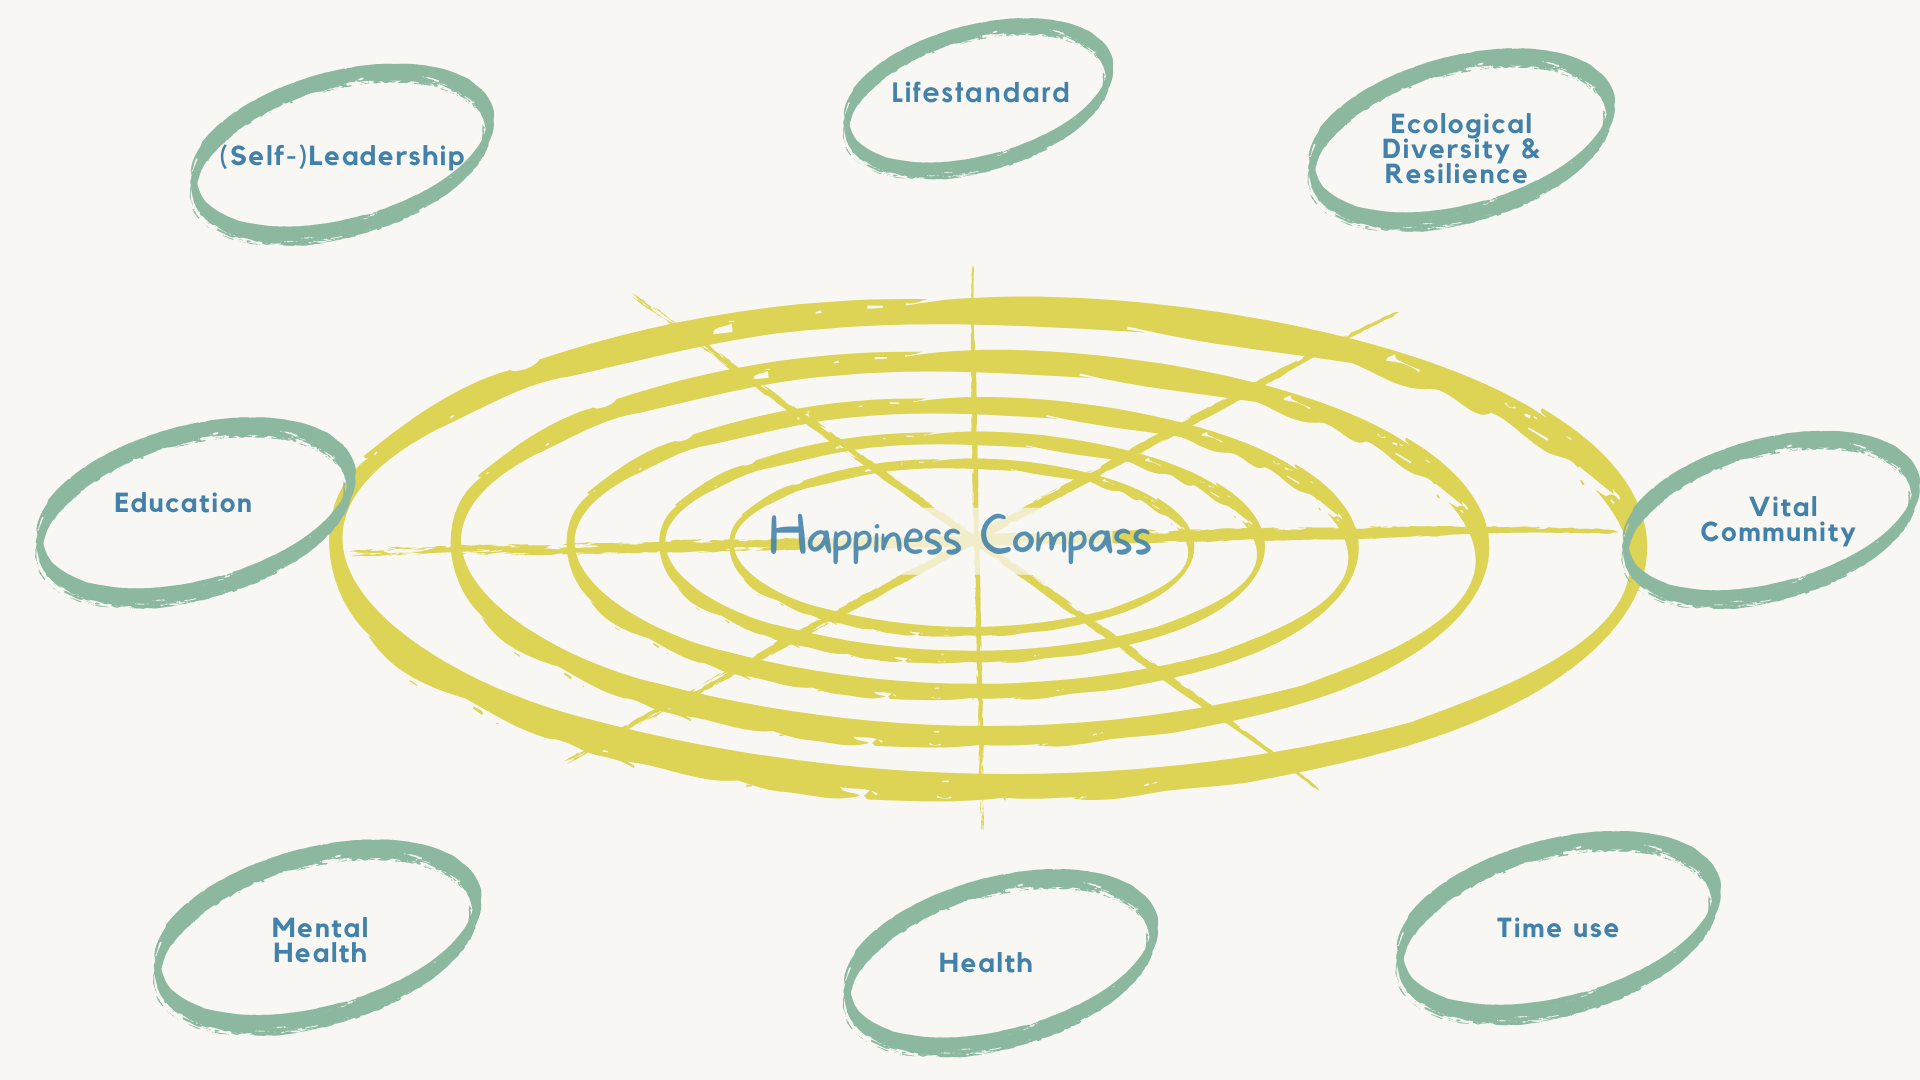 Nine domains help to find direction how to aim for happiness: Lifestandard, Ecological Diversity & Resilience, Vital Community, Time use, Health, Mental Health, Education and (Self-)Leadership